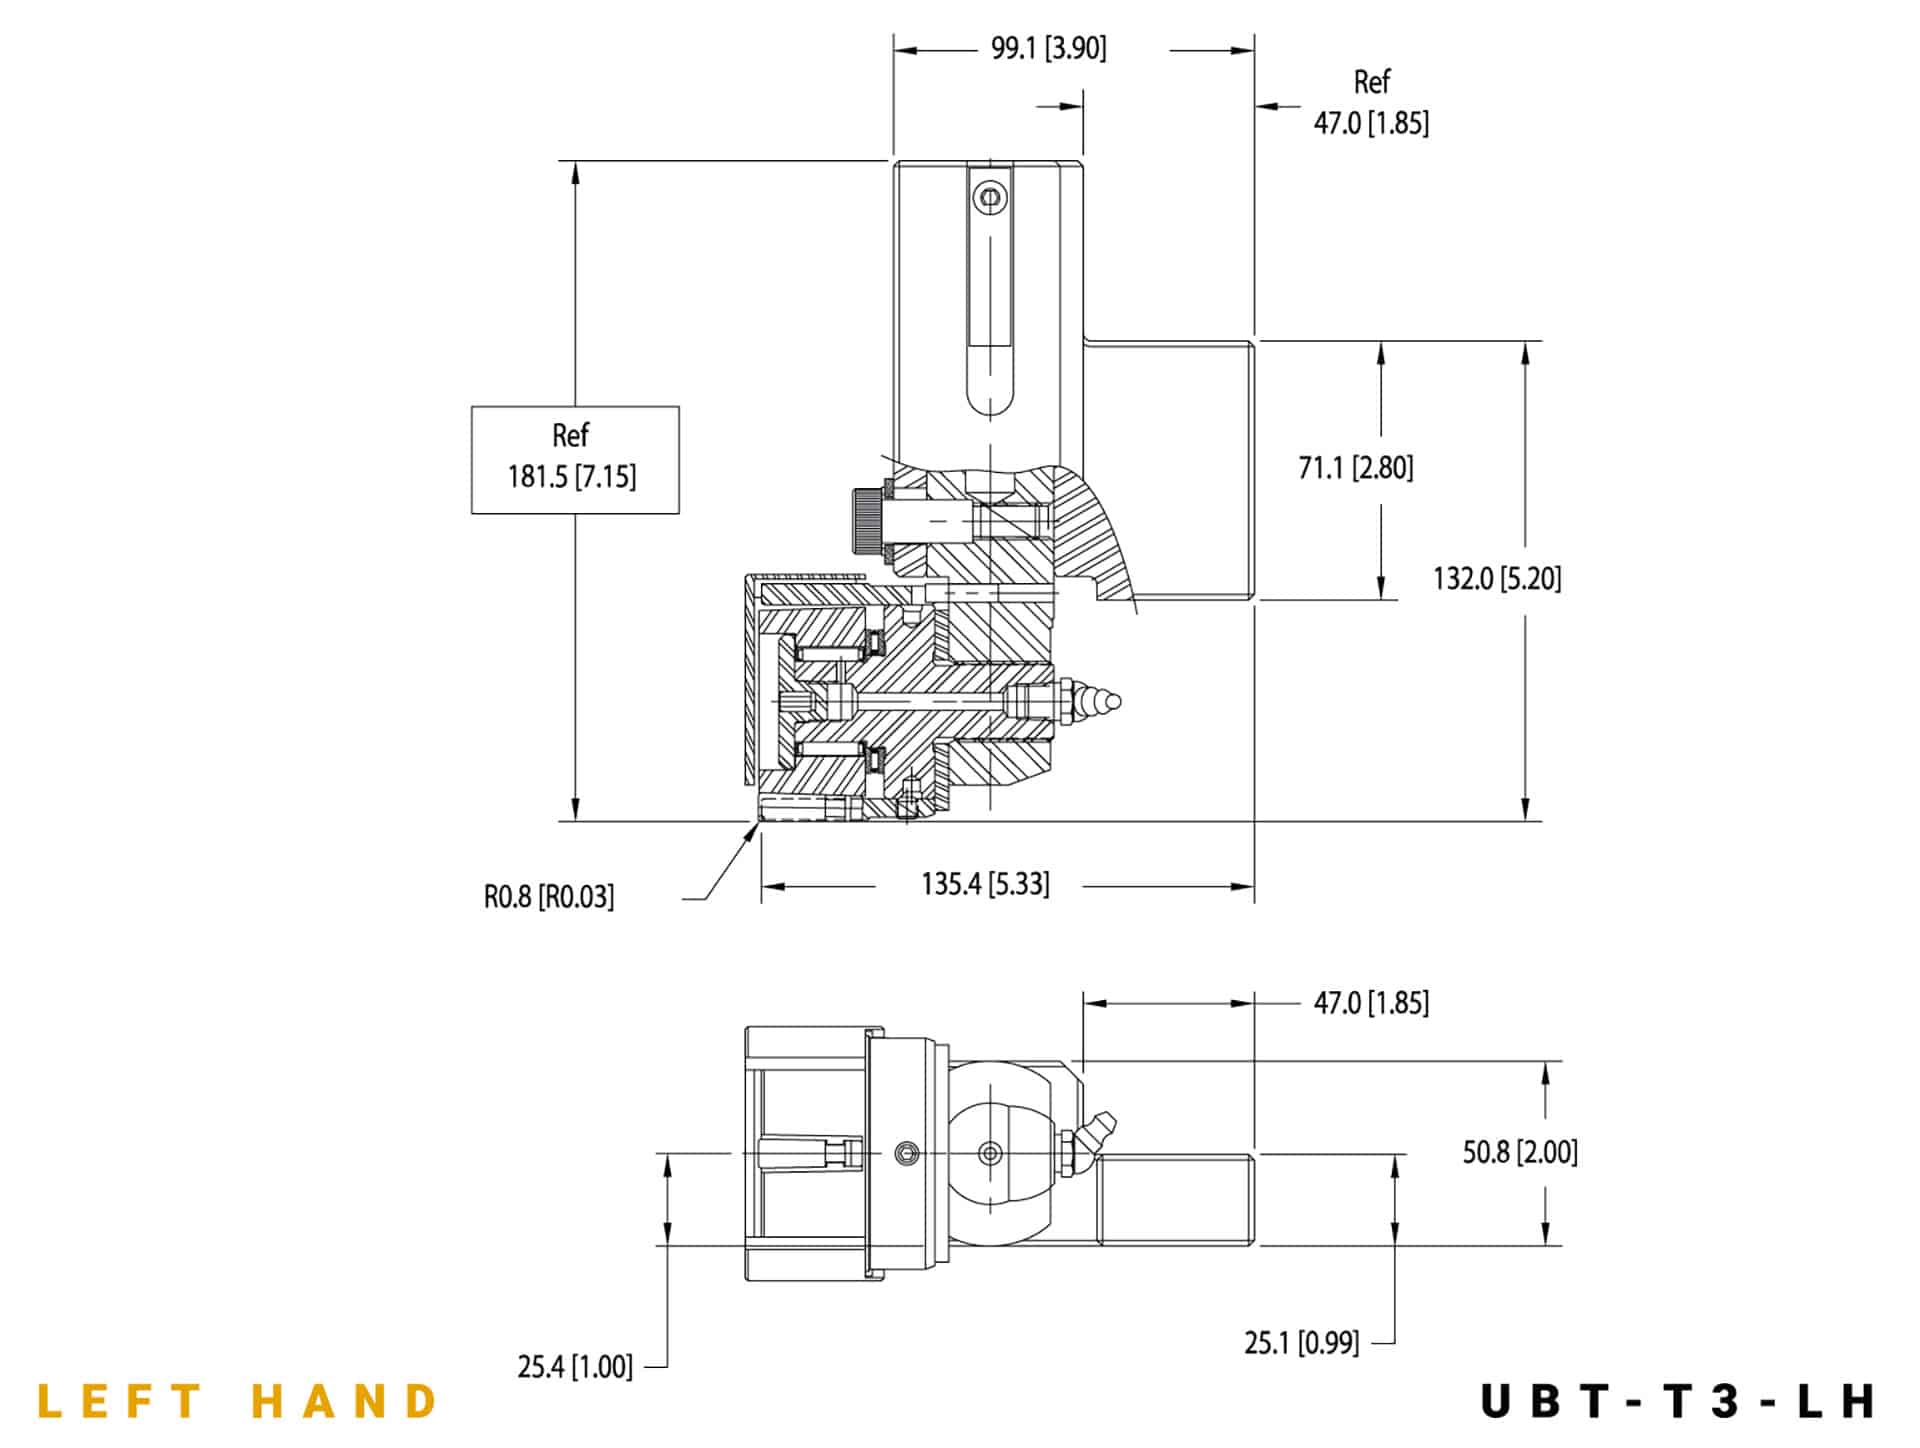 UBT-T3 LH specifications